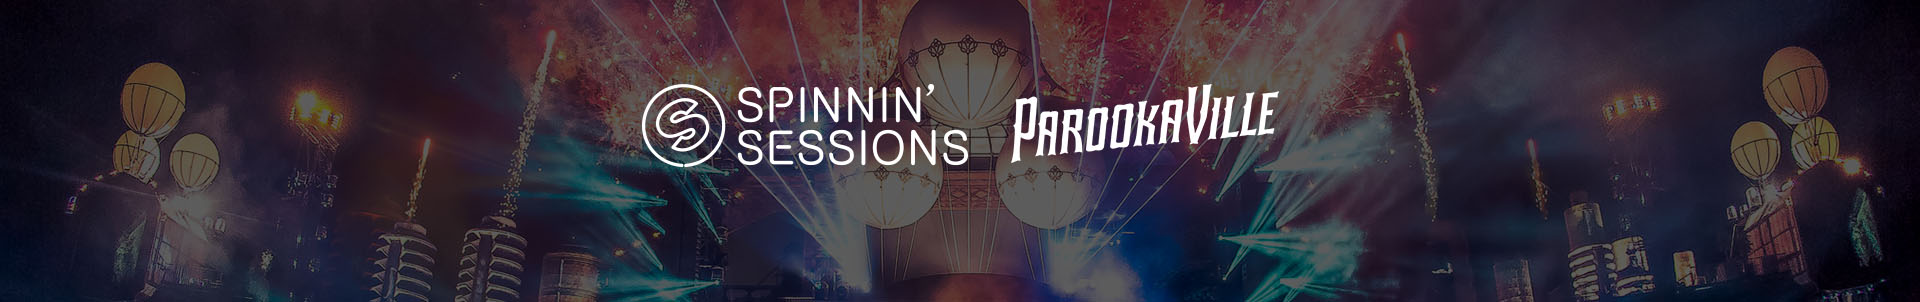 Watch the Spinnin' Sessions line-up at Parookaville